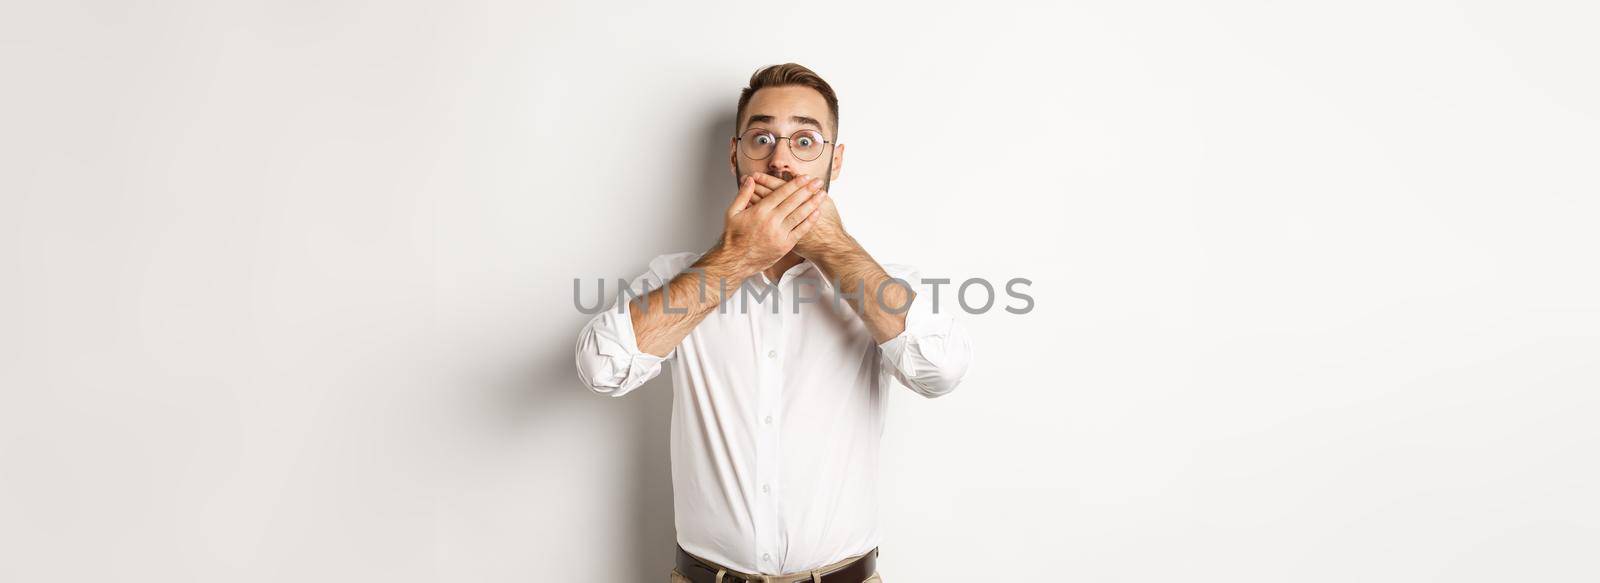 Shocked man gasping and looking at something in awe, covering mouth with hands, white background.